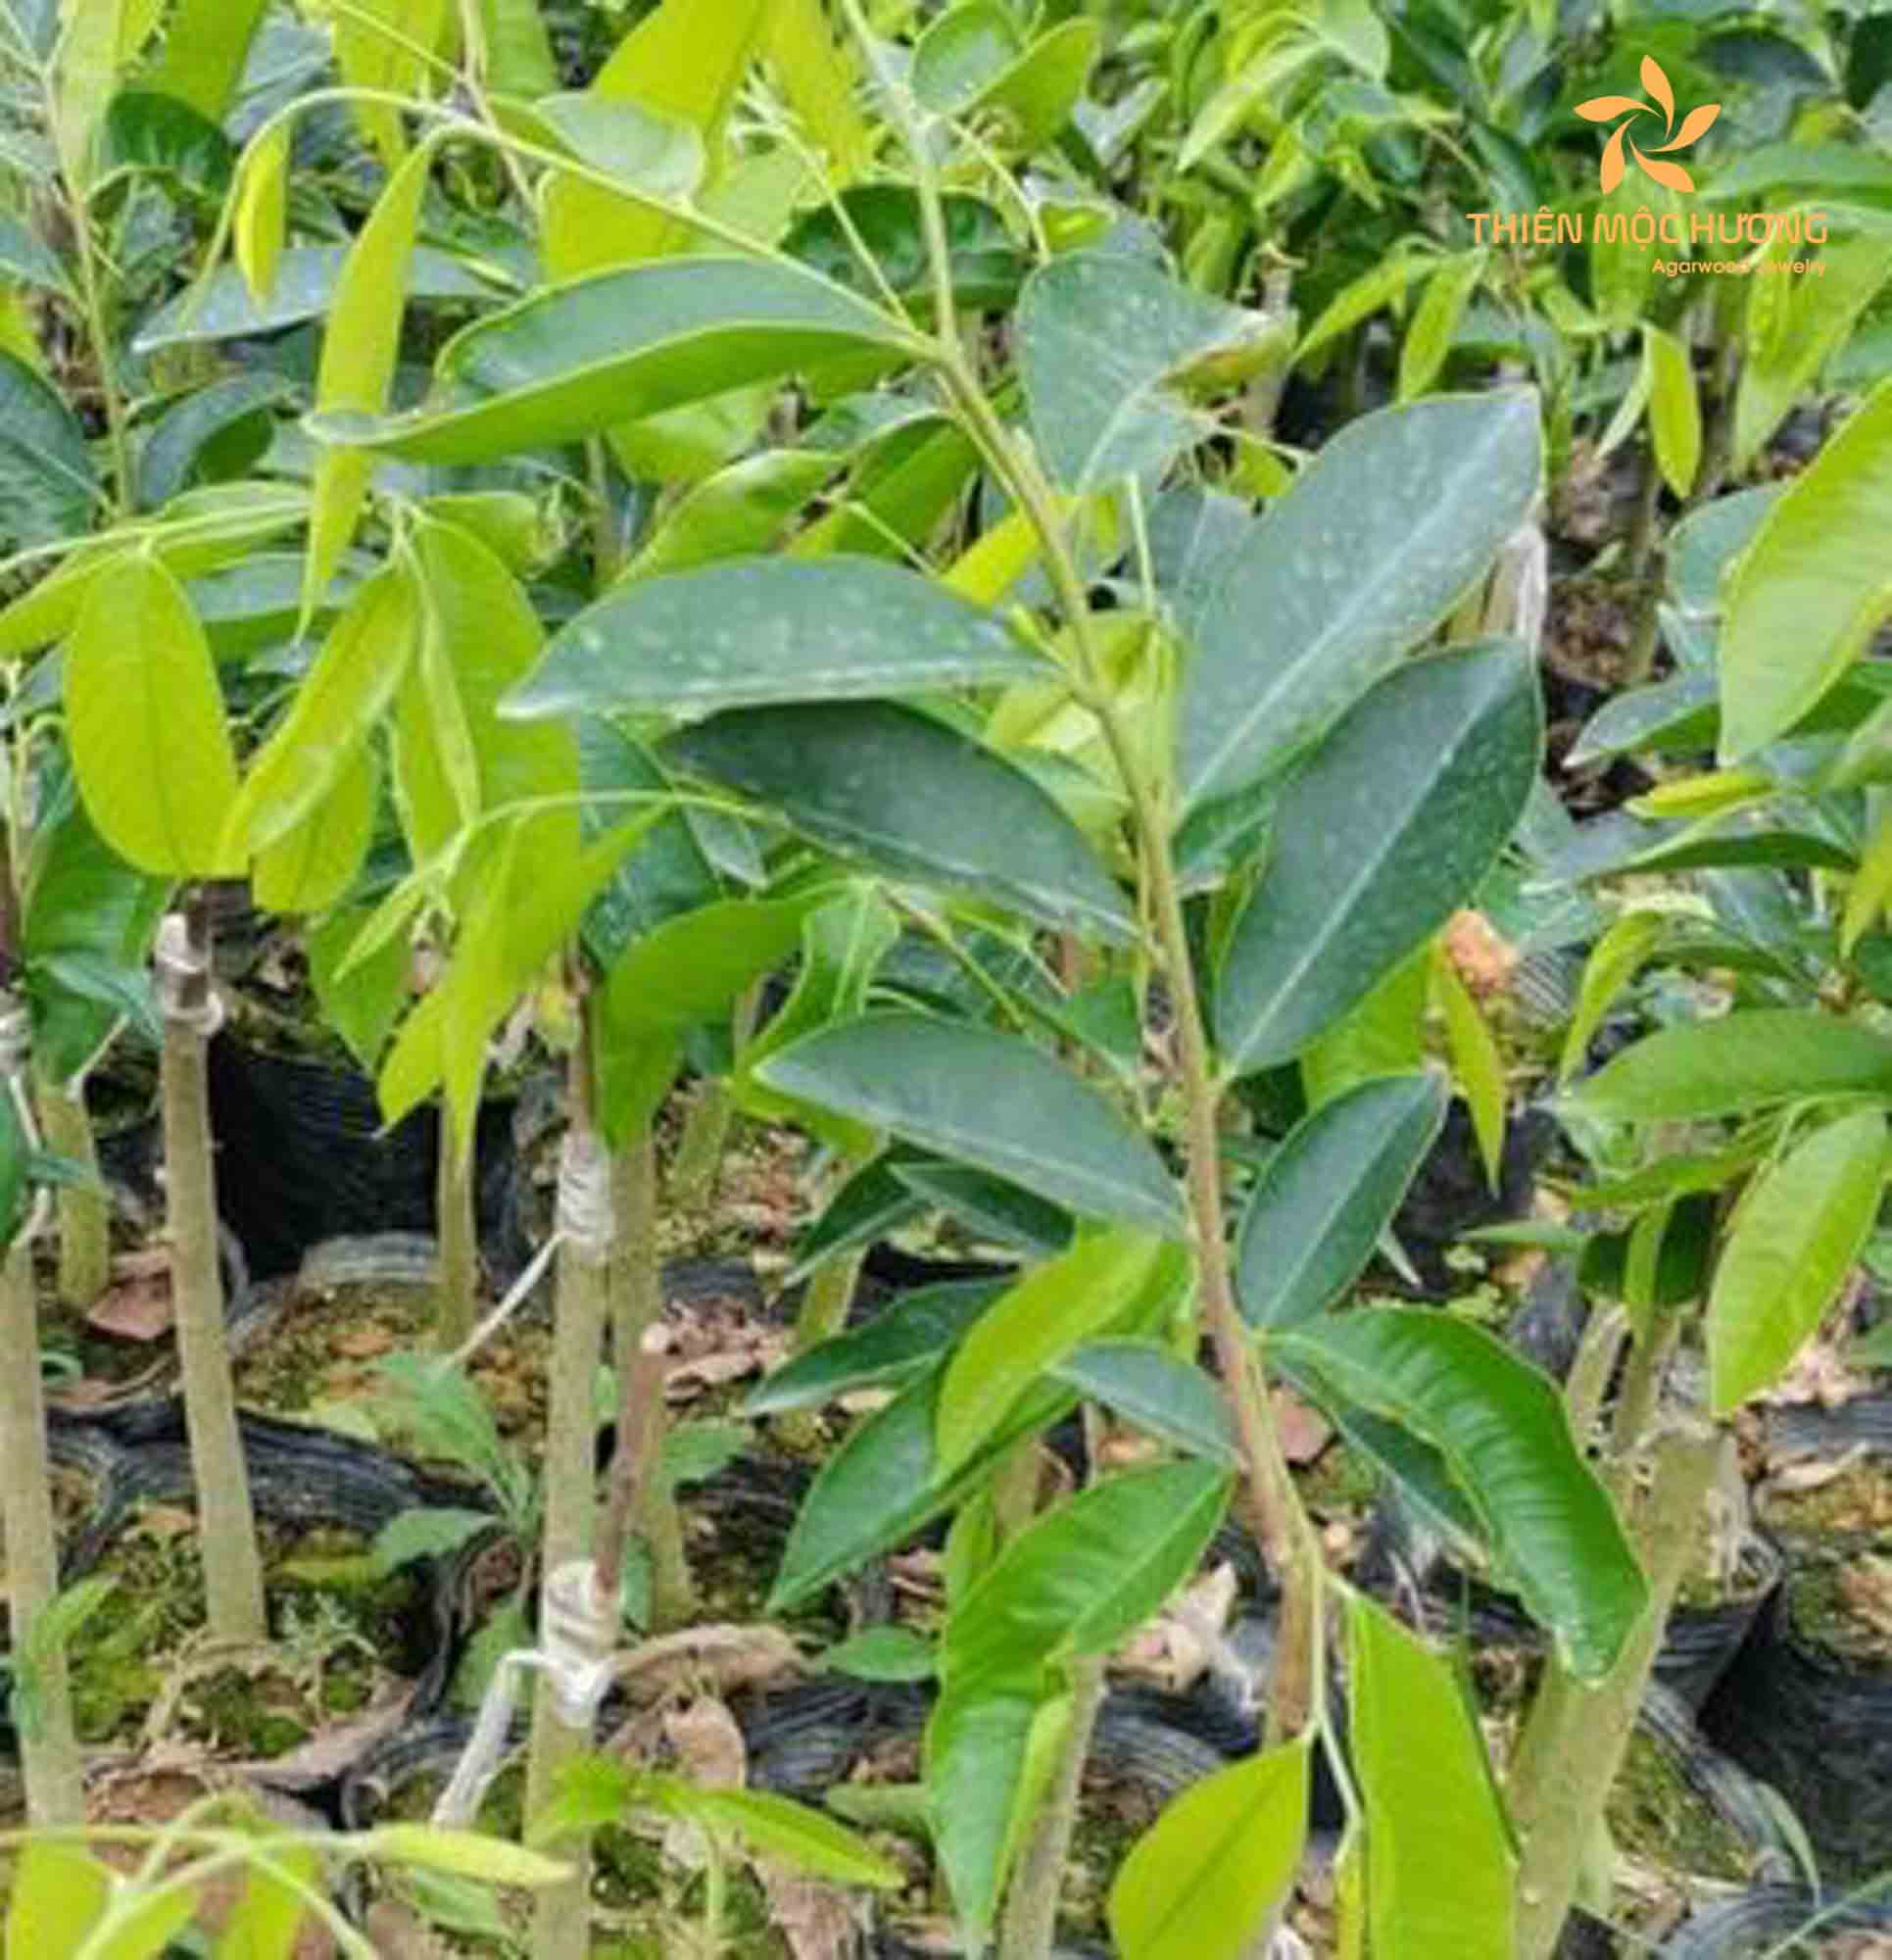 Keep in mind that the formation of agarwood seedlings is a gradual process.